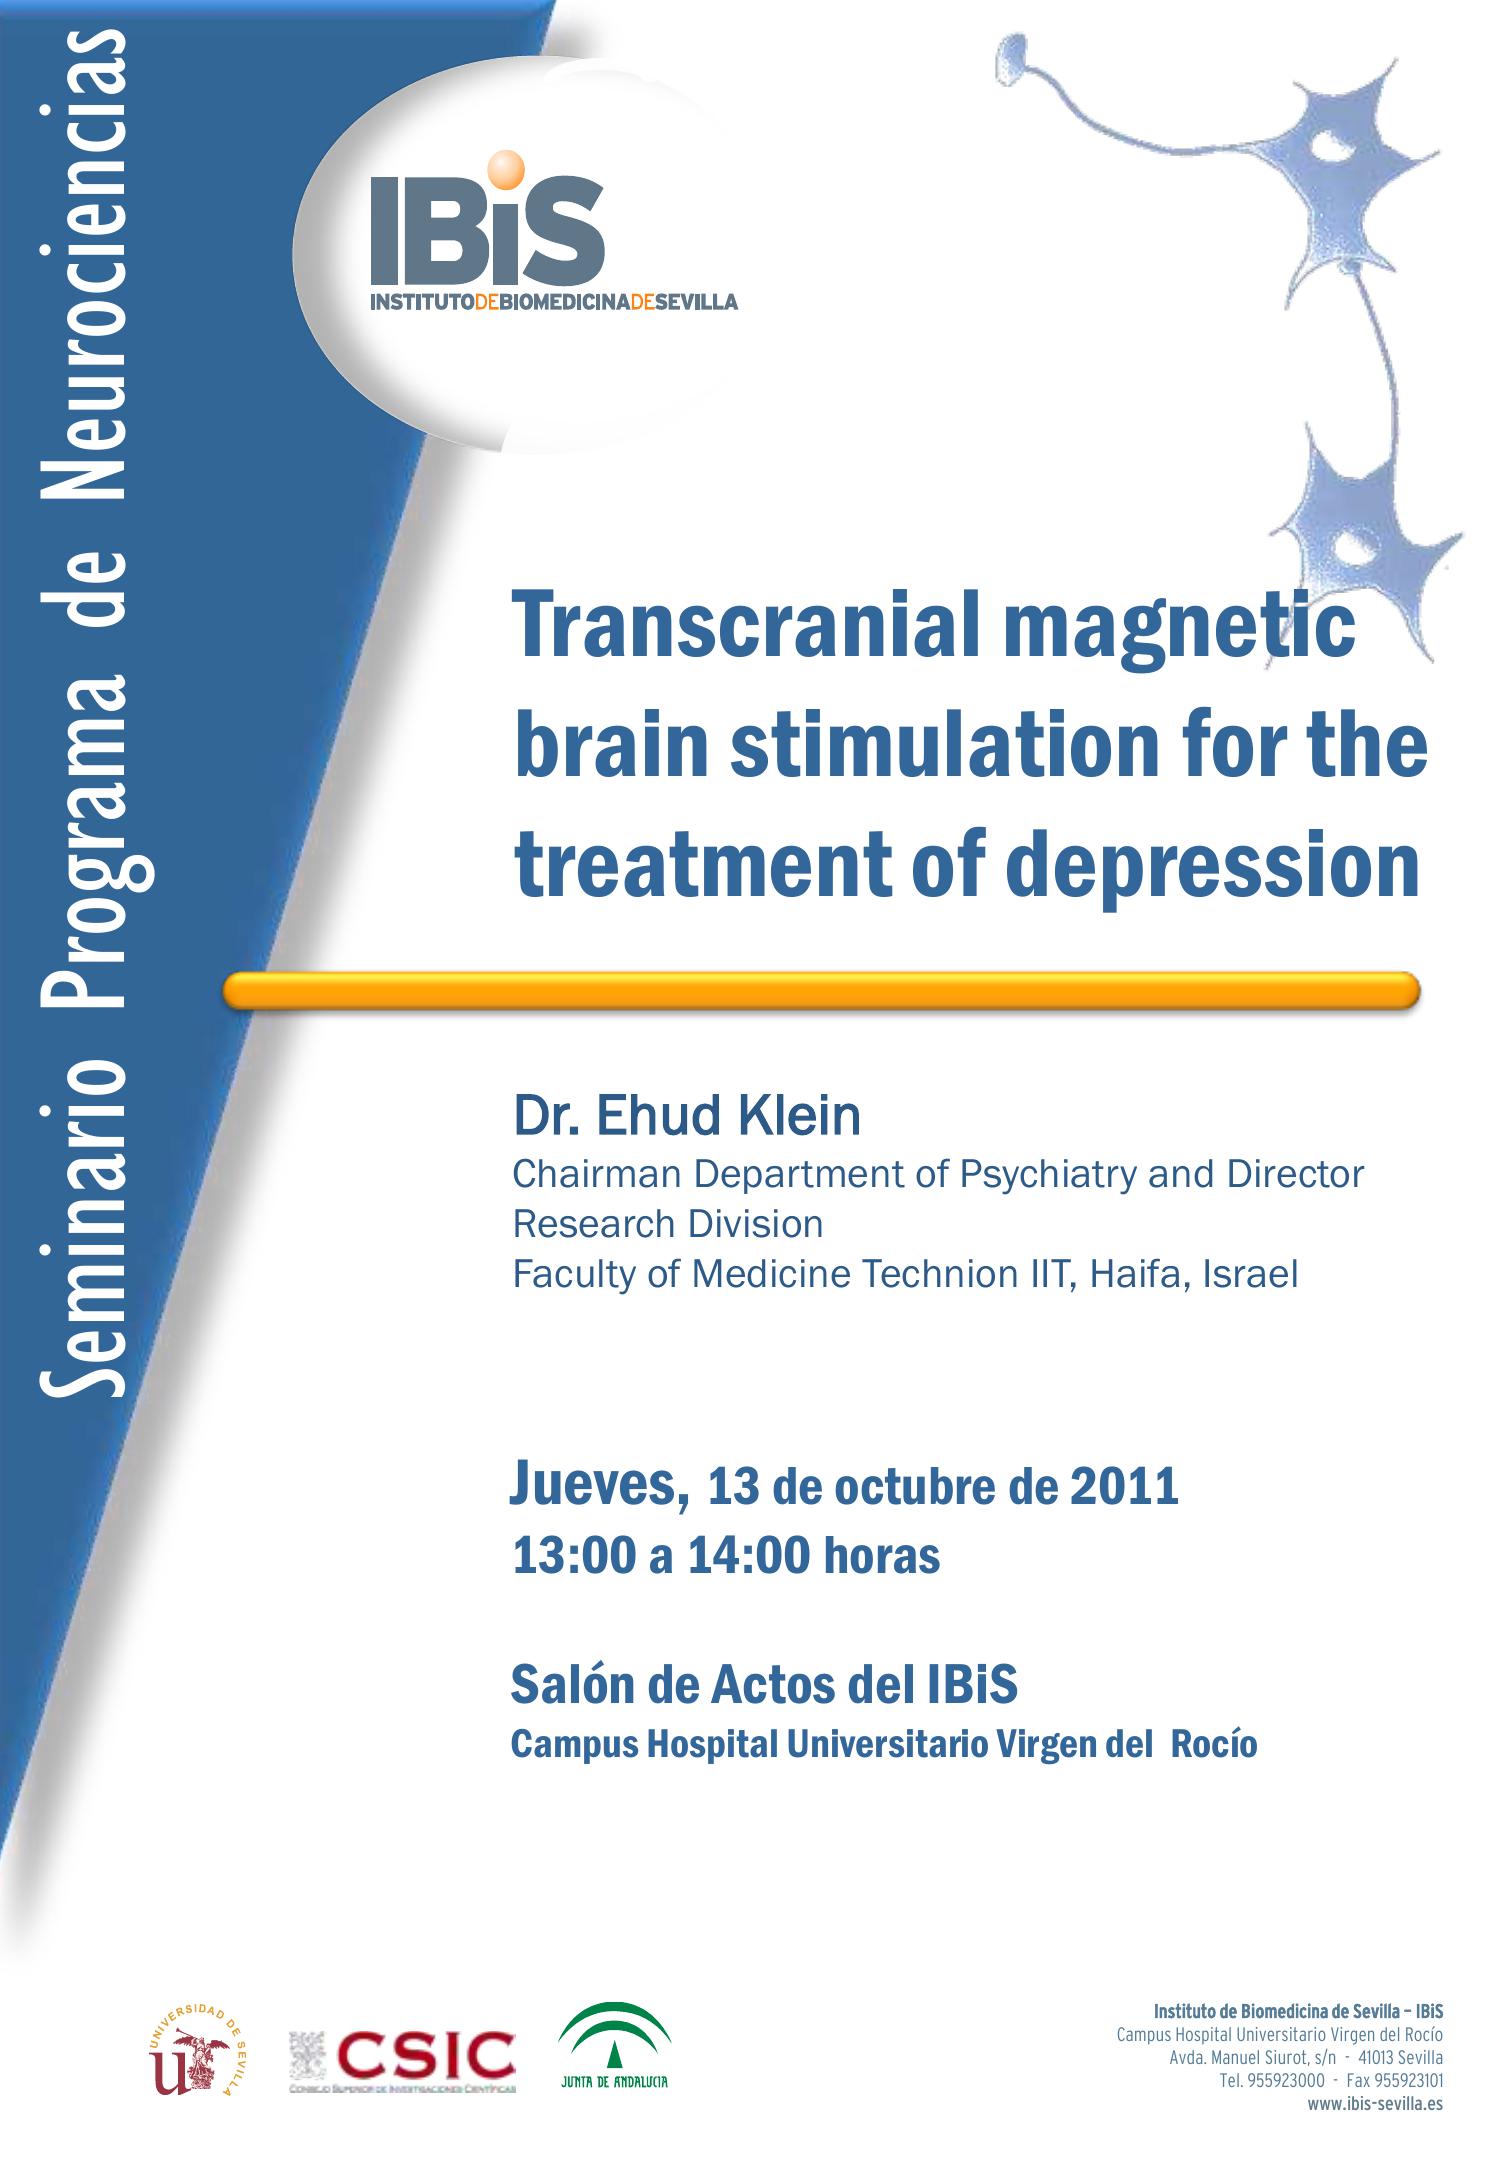 Poster: Transcranial magnetic brain stimulation for the treatment of depression.